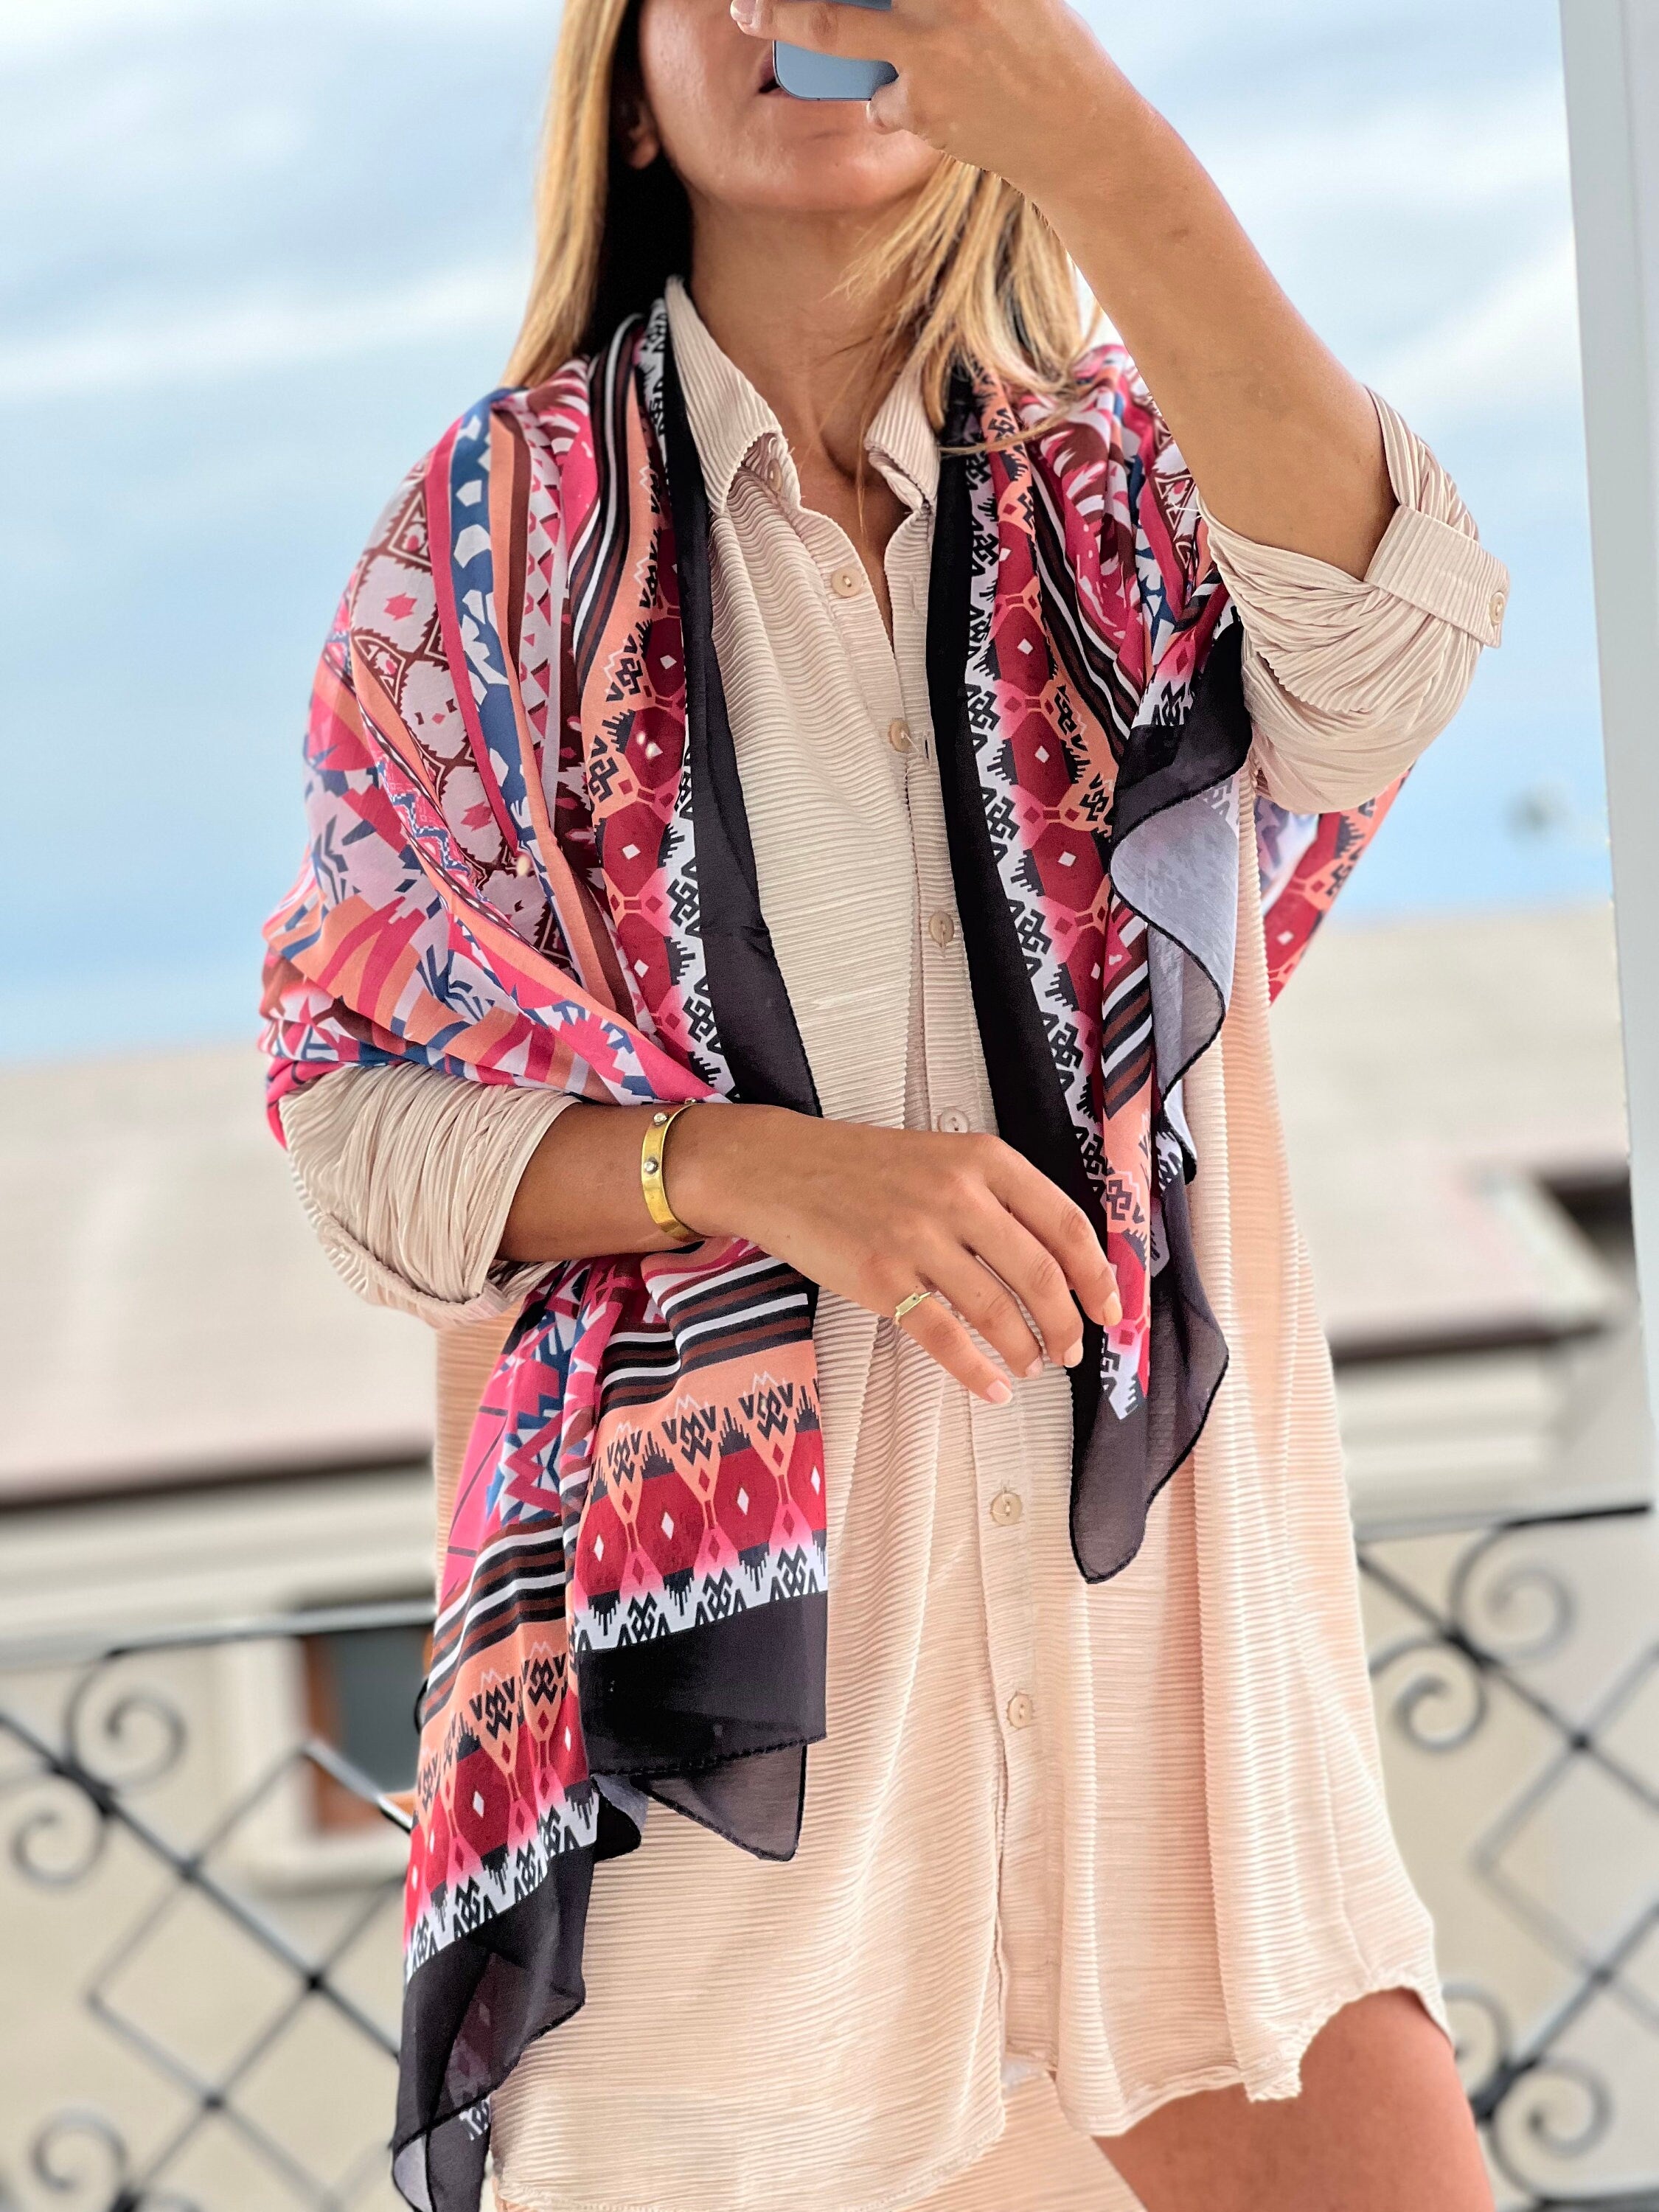 Add a pop of color to your look with this Large Cotton-Viscose blend voile scarf in shades of pink, green, and black. Ideal for all seasons, this scarf features a unique and authentic pattern that is both stylish and cozy.